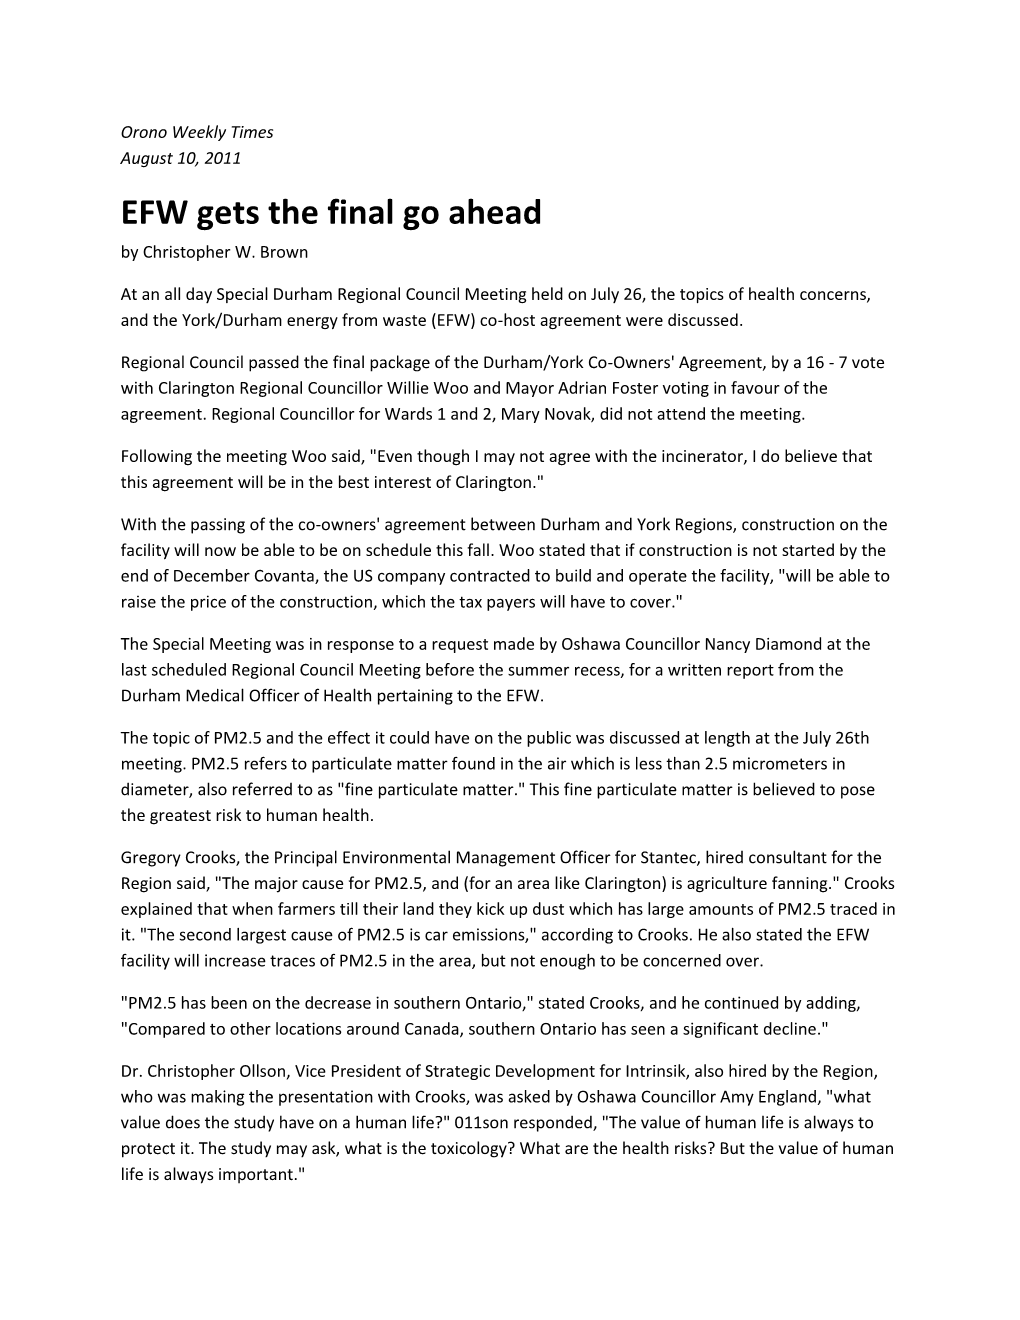 EFW Gets the Final Go Ahead by Christopher W